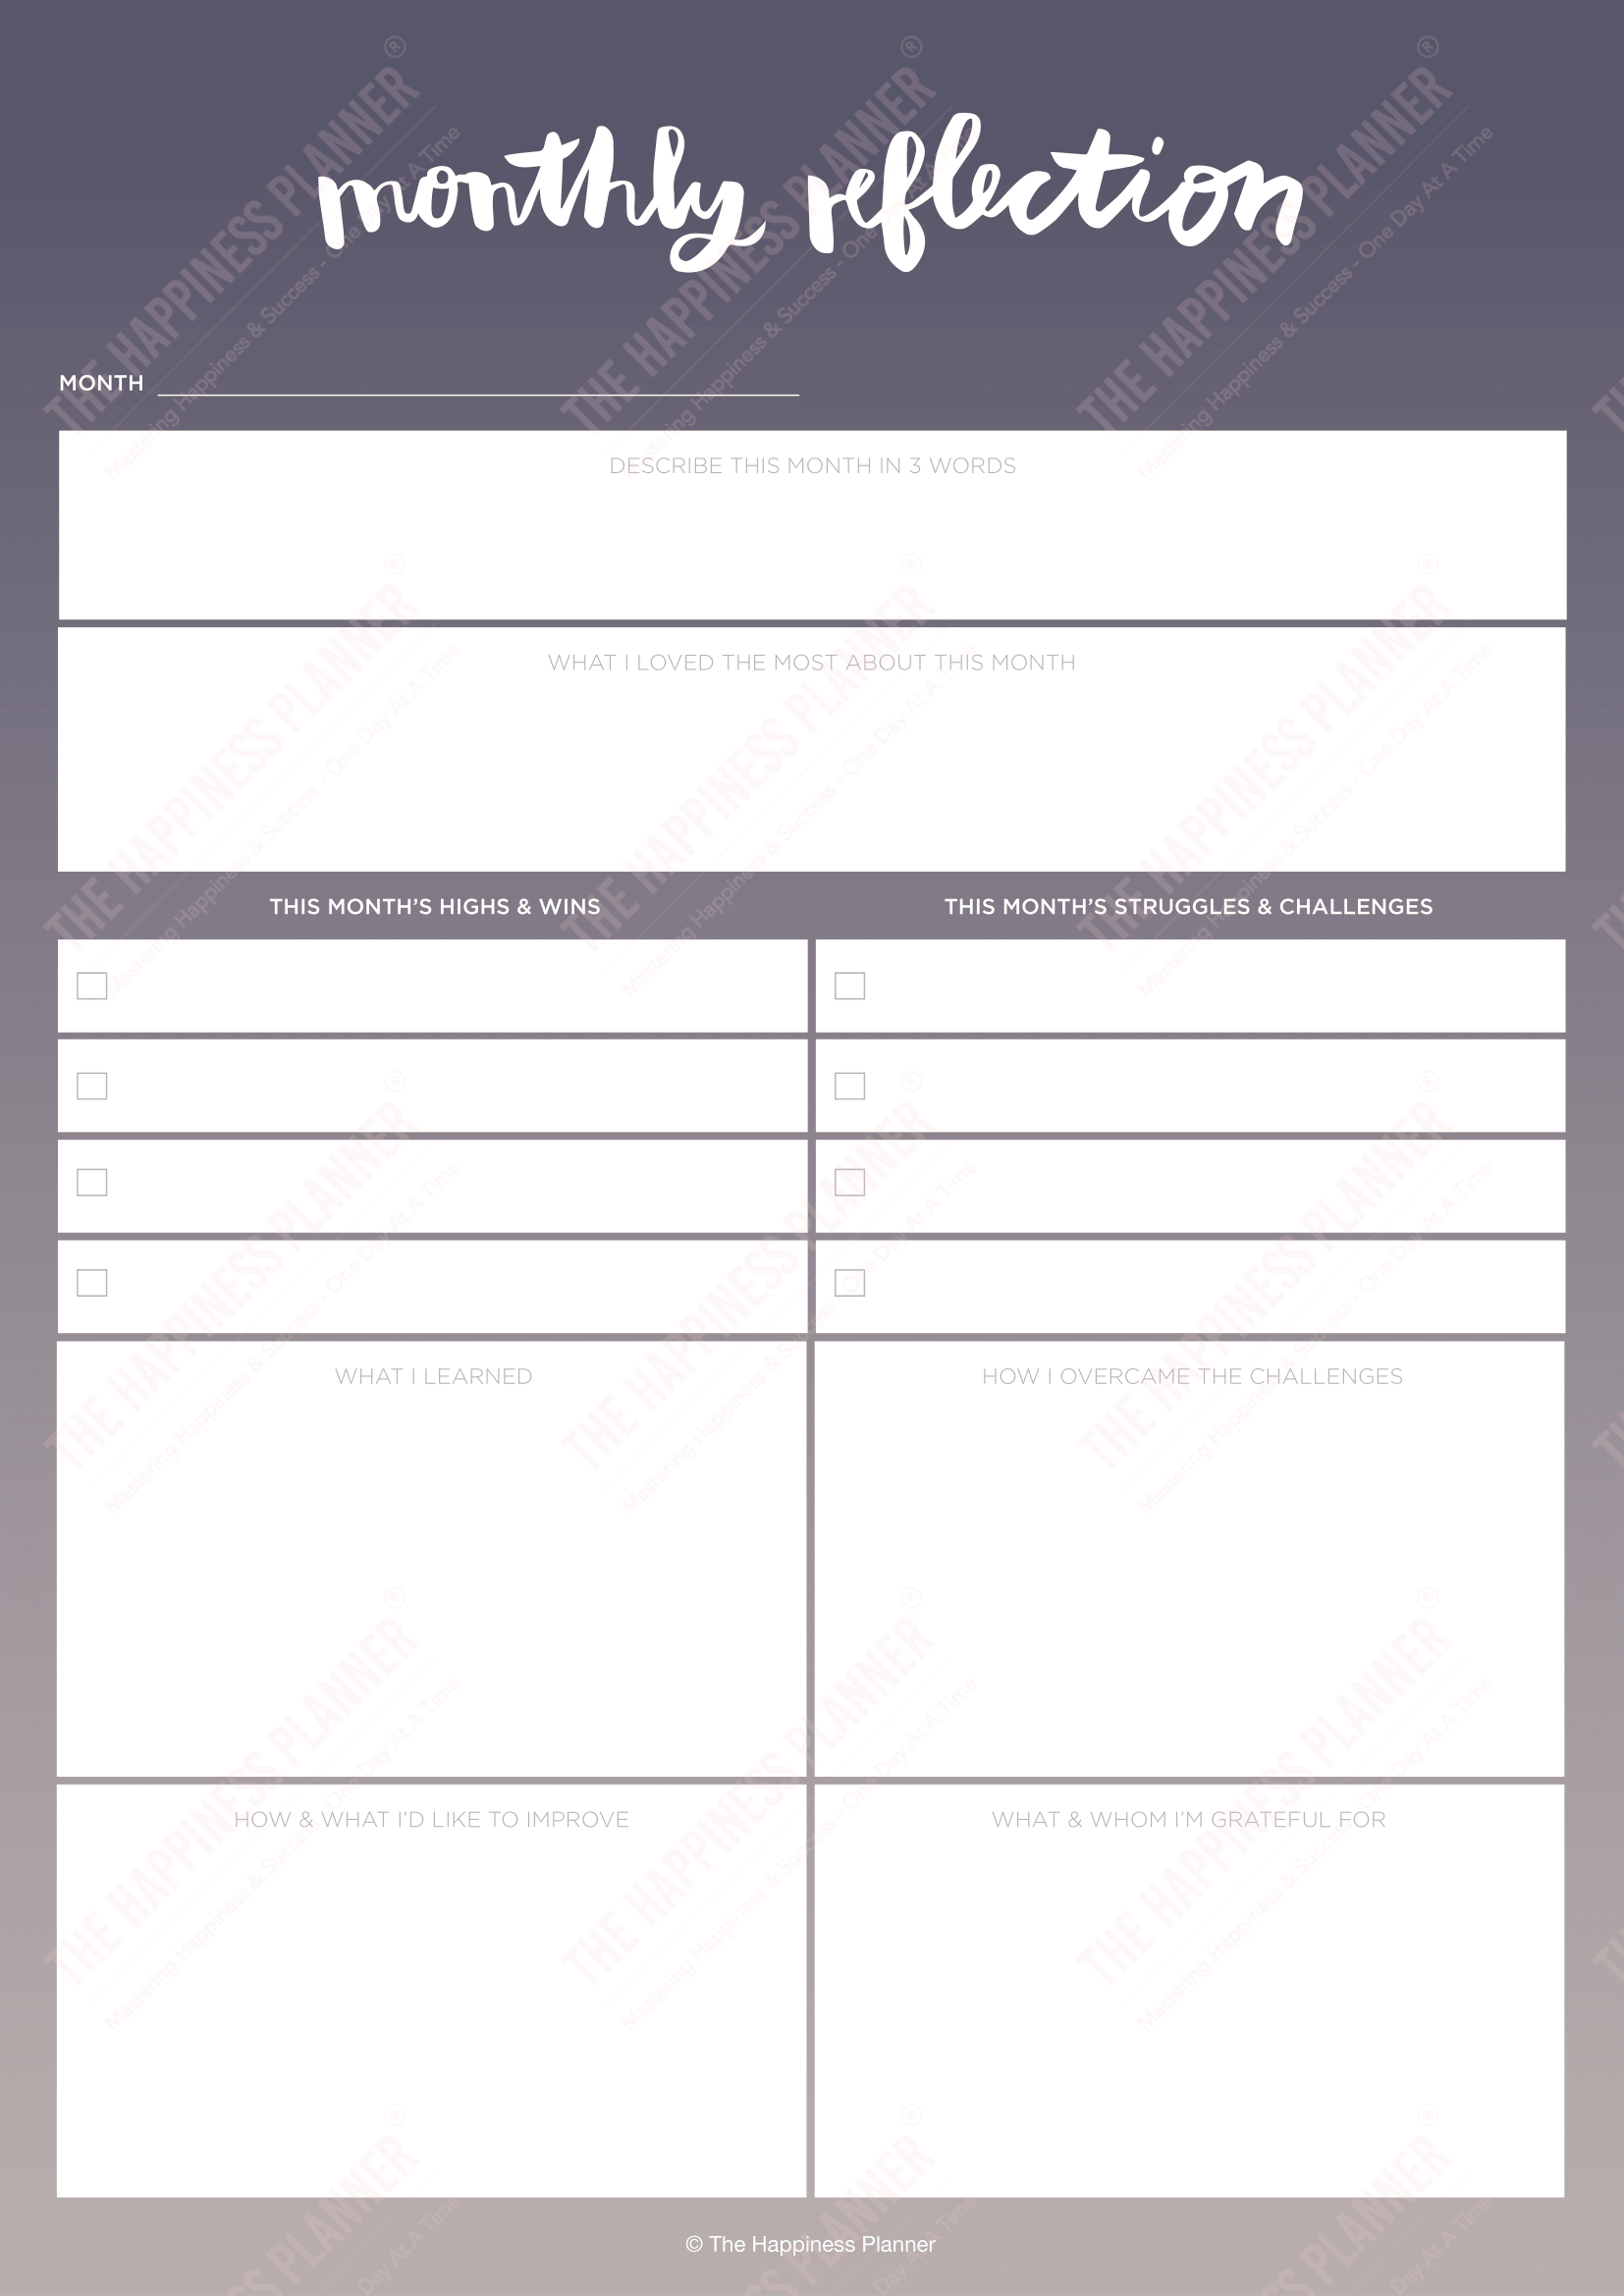 Premium Printables: #Planner - The Happiness Planner®